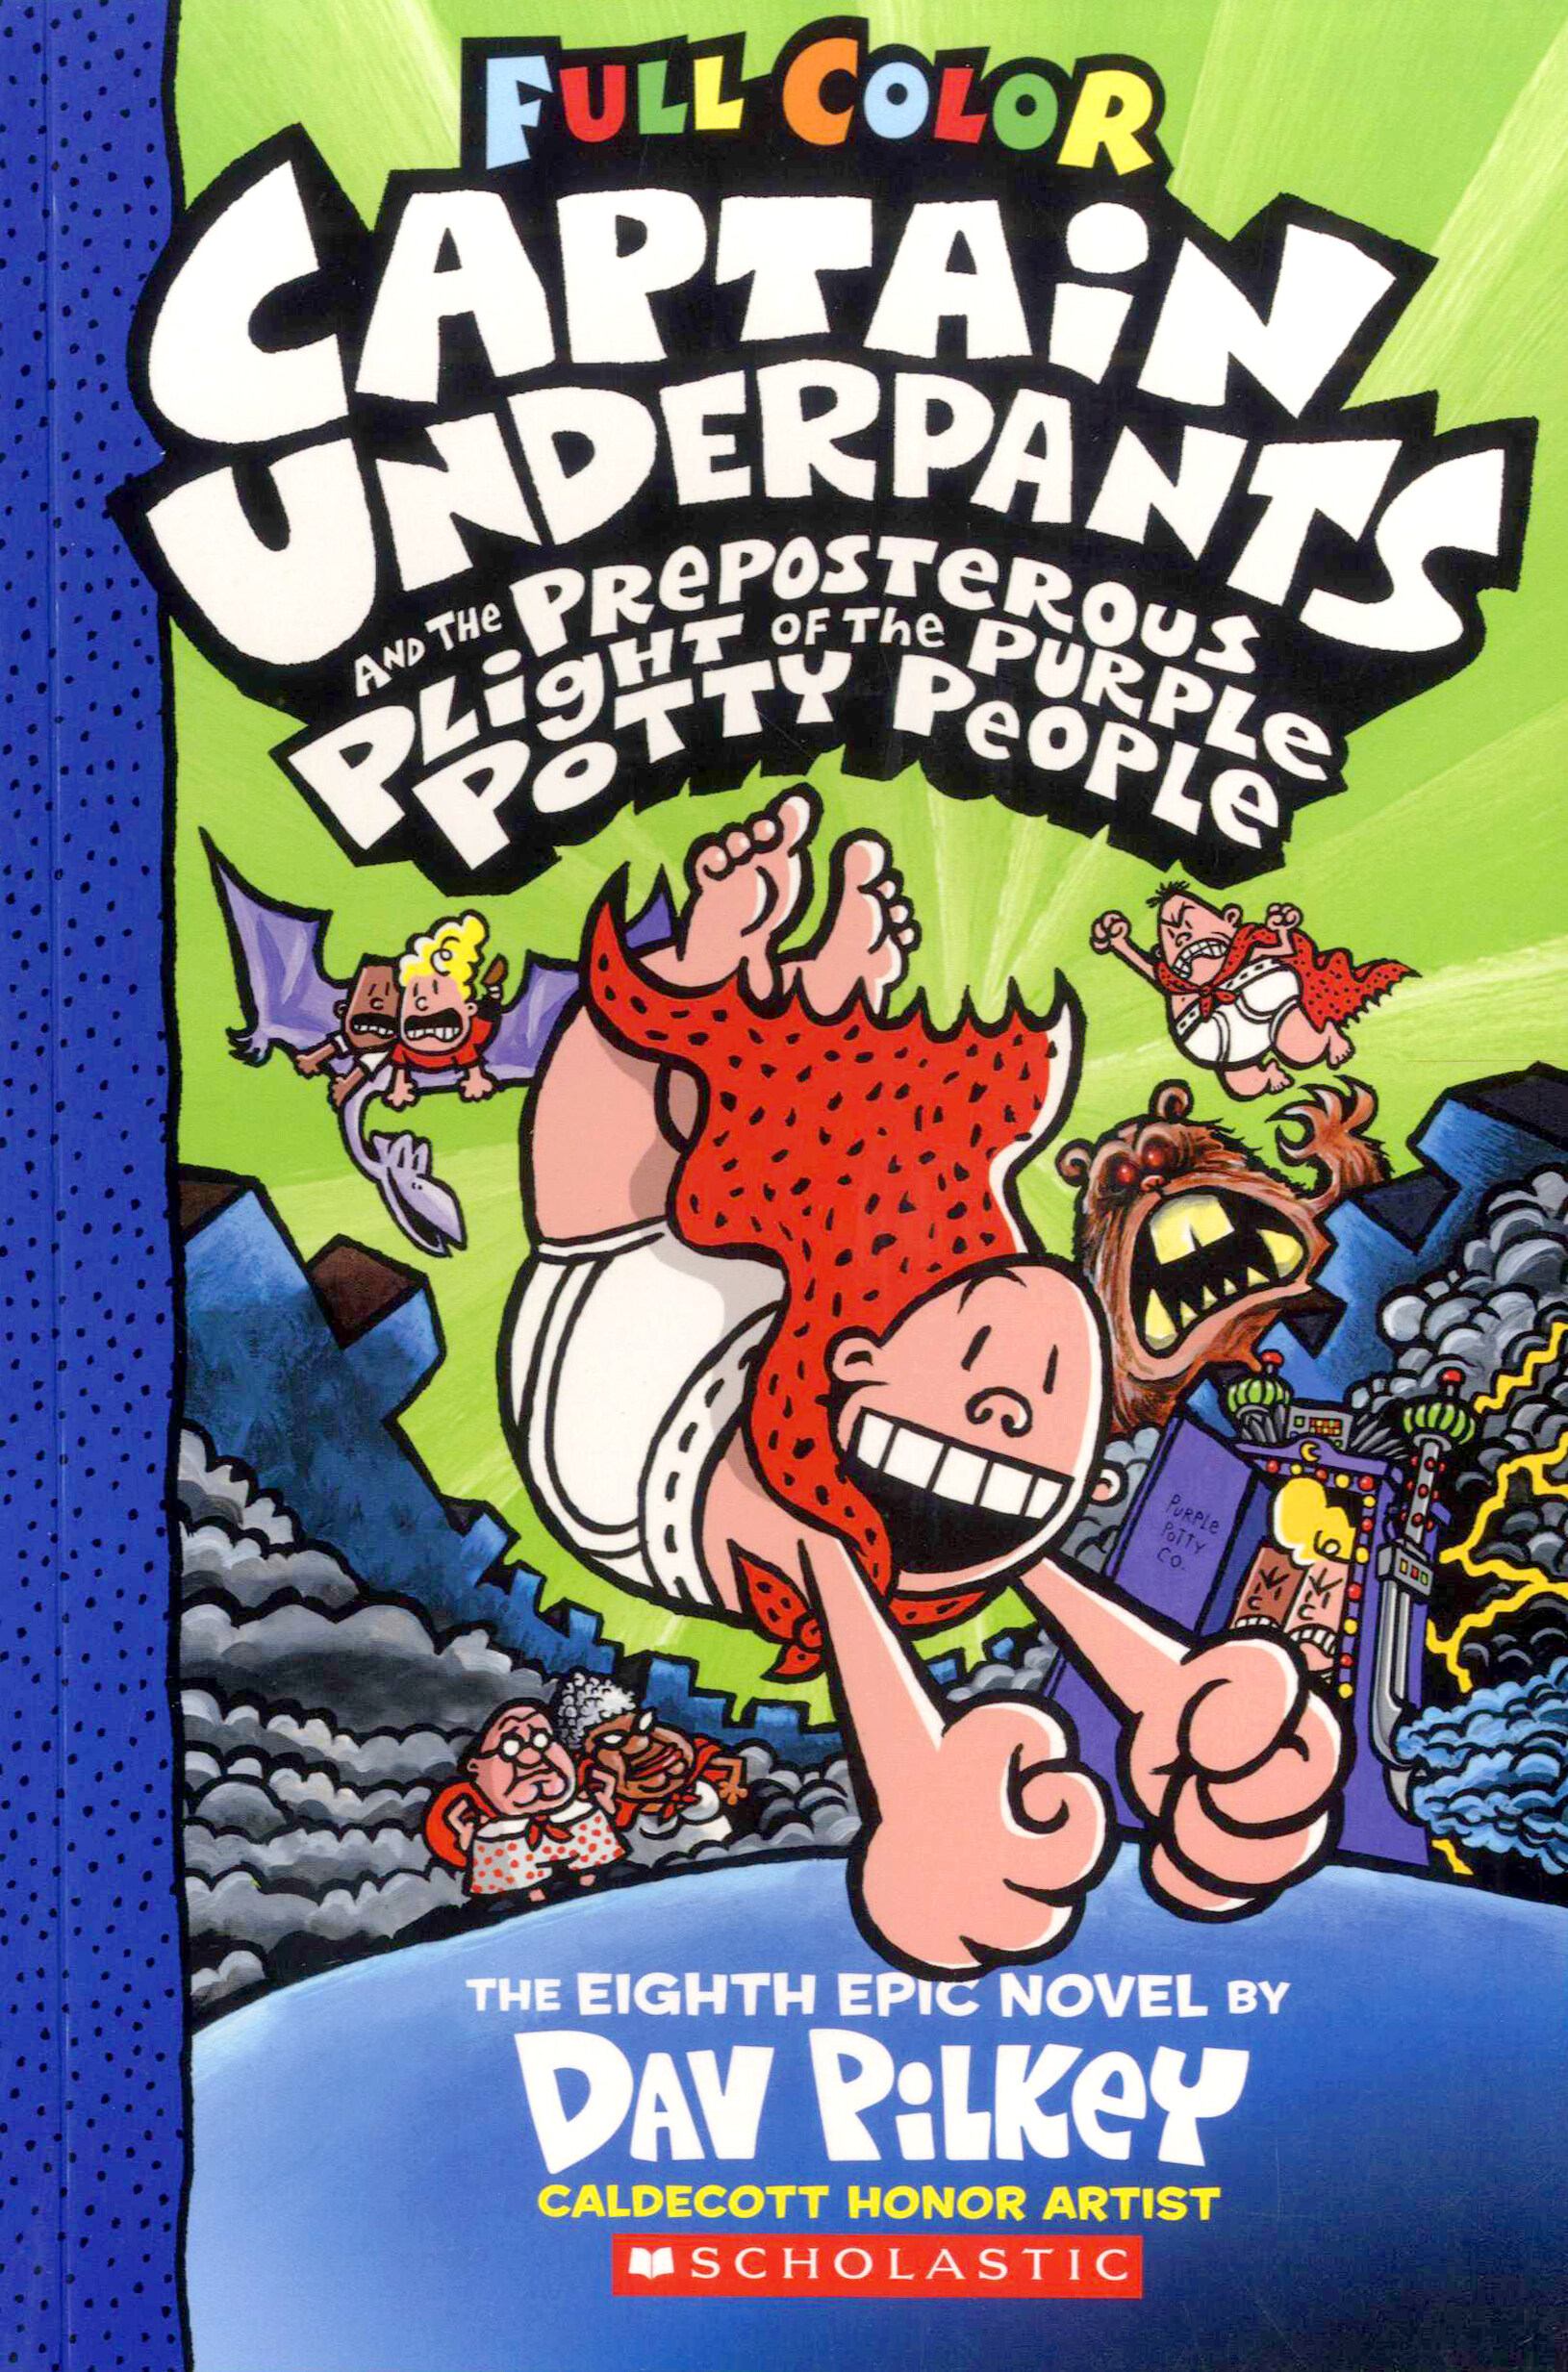 Captain underpants and the preposterous plight of the purple potty people